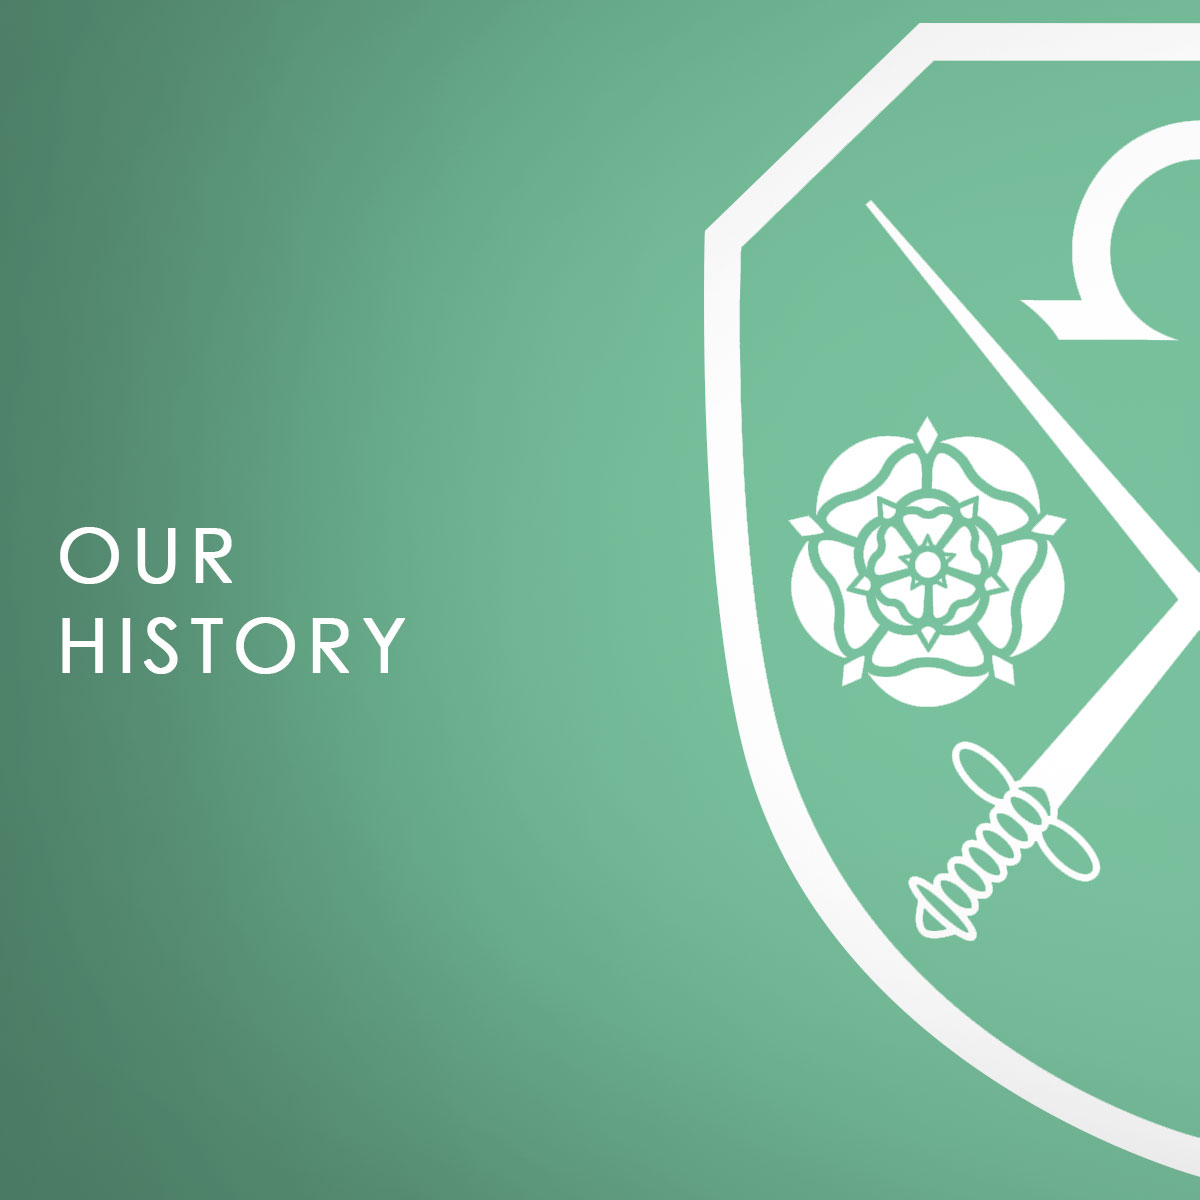 A green background with the East Barnet School logo which says about East Barnet School history